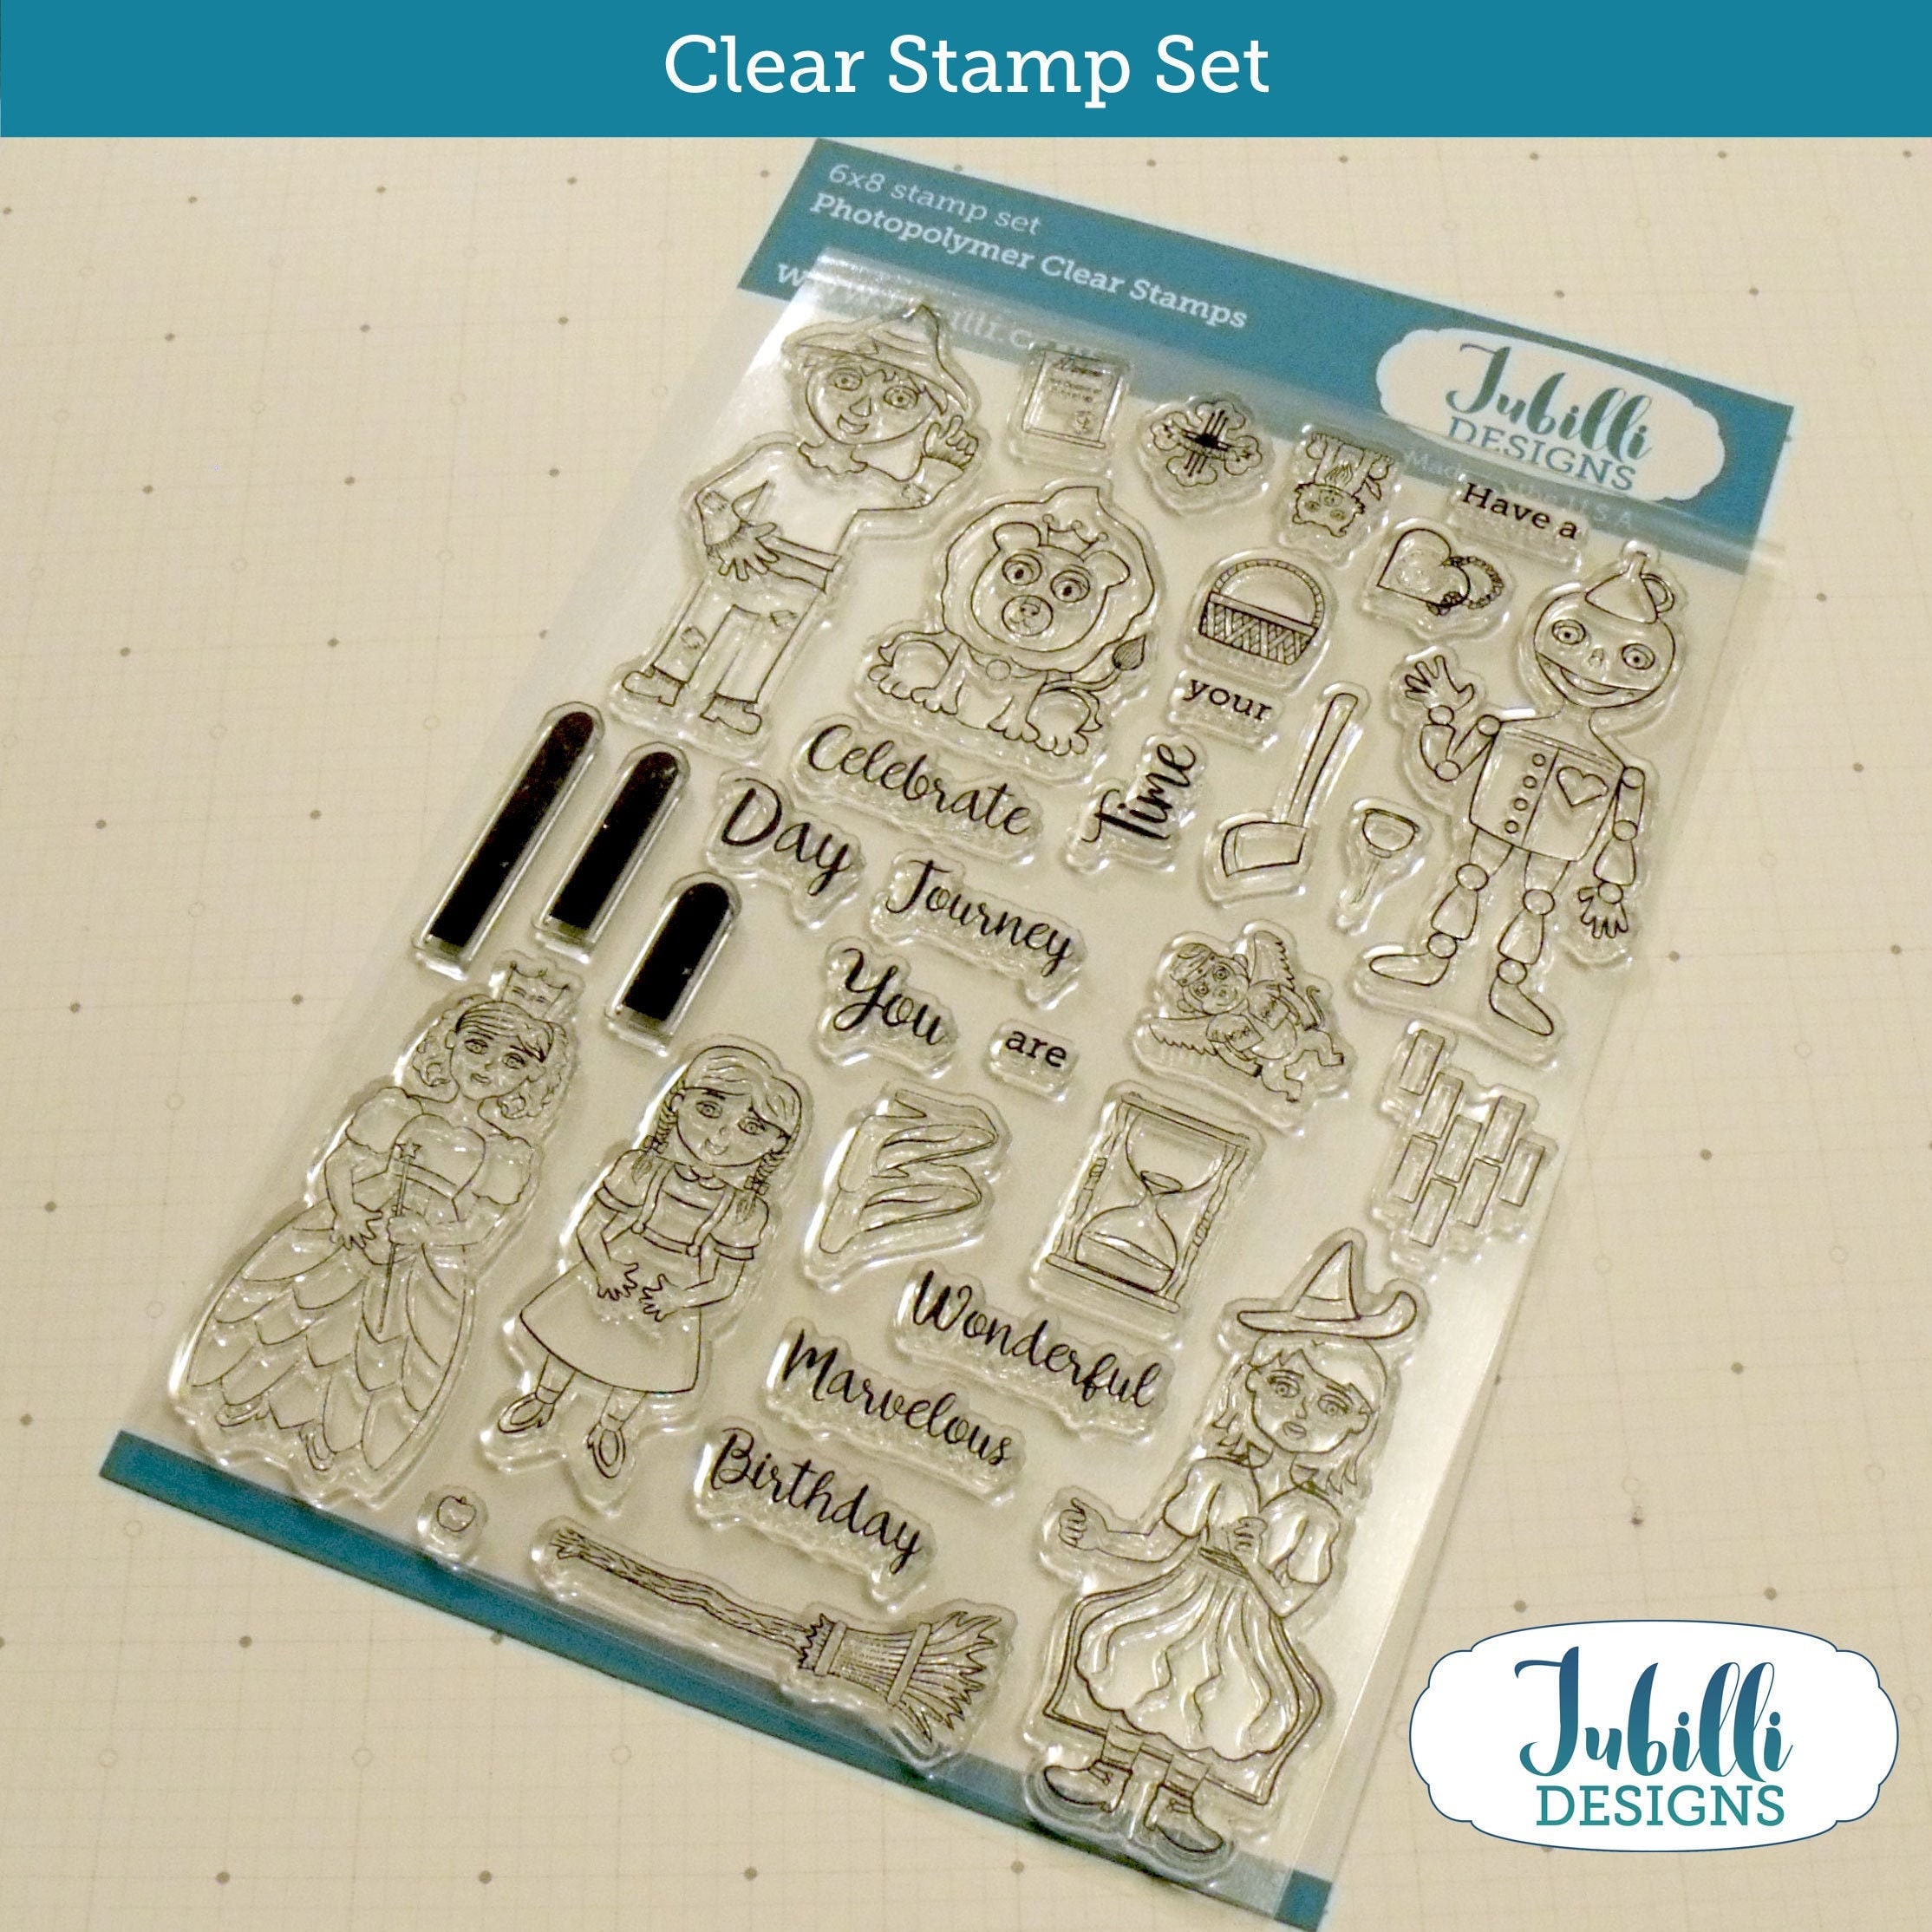 6 ~ Owl Stampers / Ink Stamps ~ Plastic ~ Approx. 1.5 ~ New /  Shirnk-wrapped